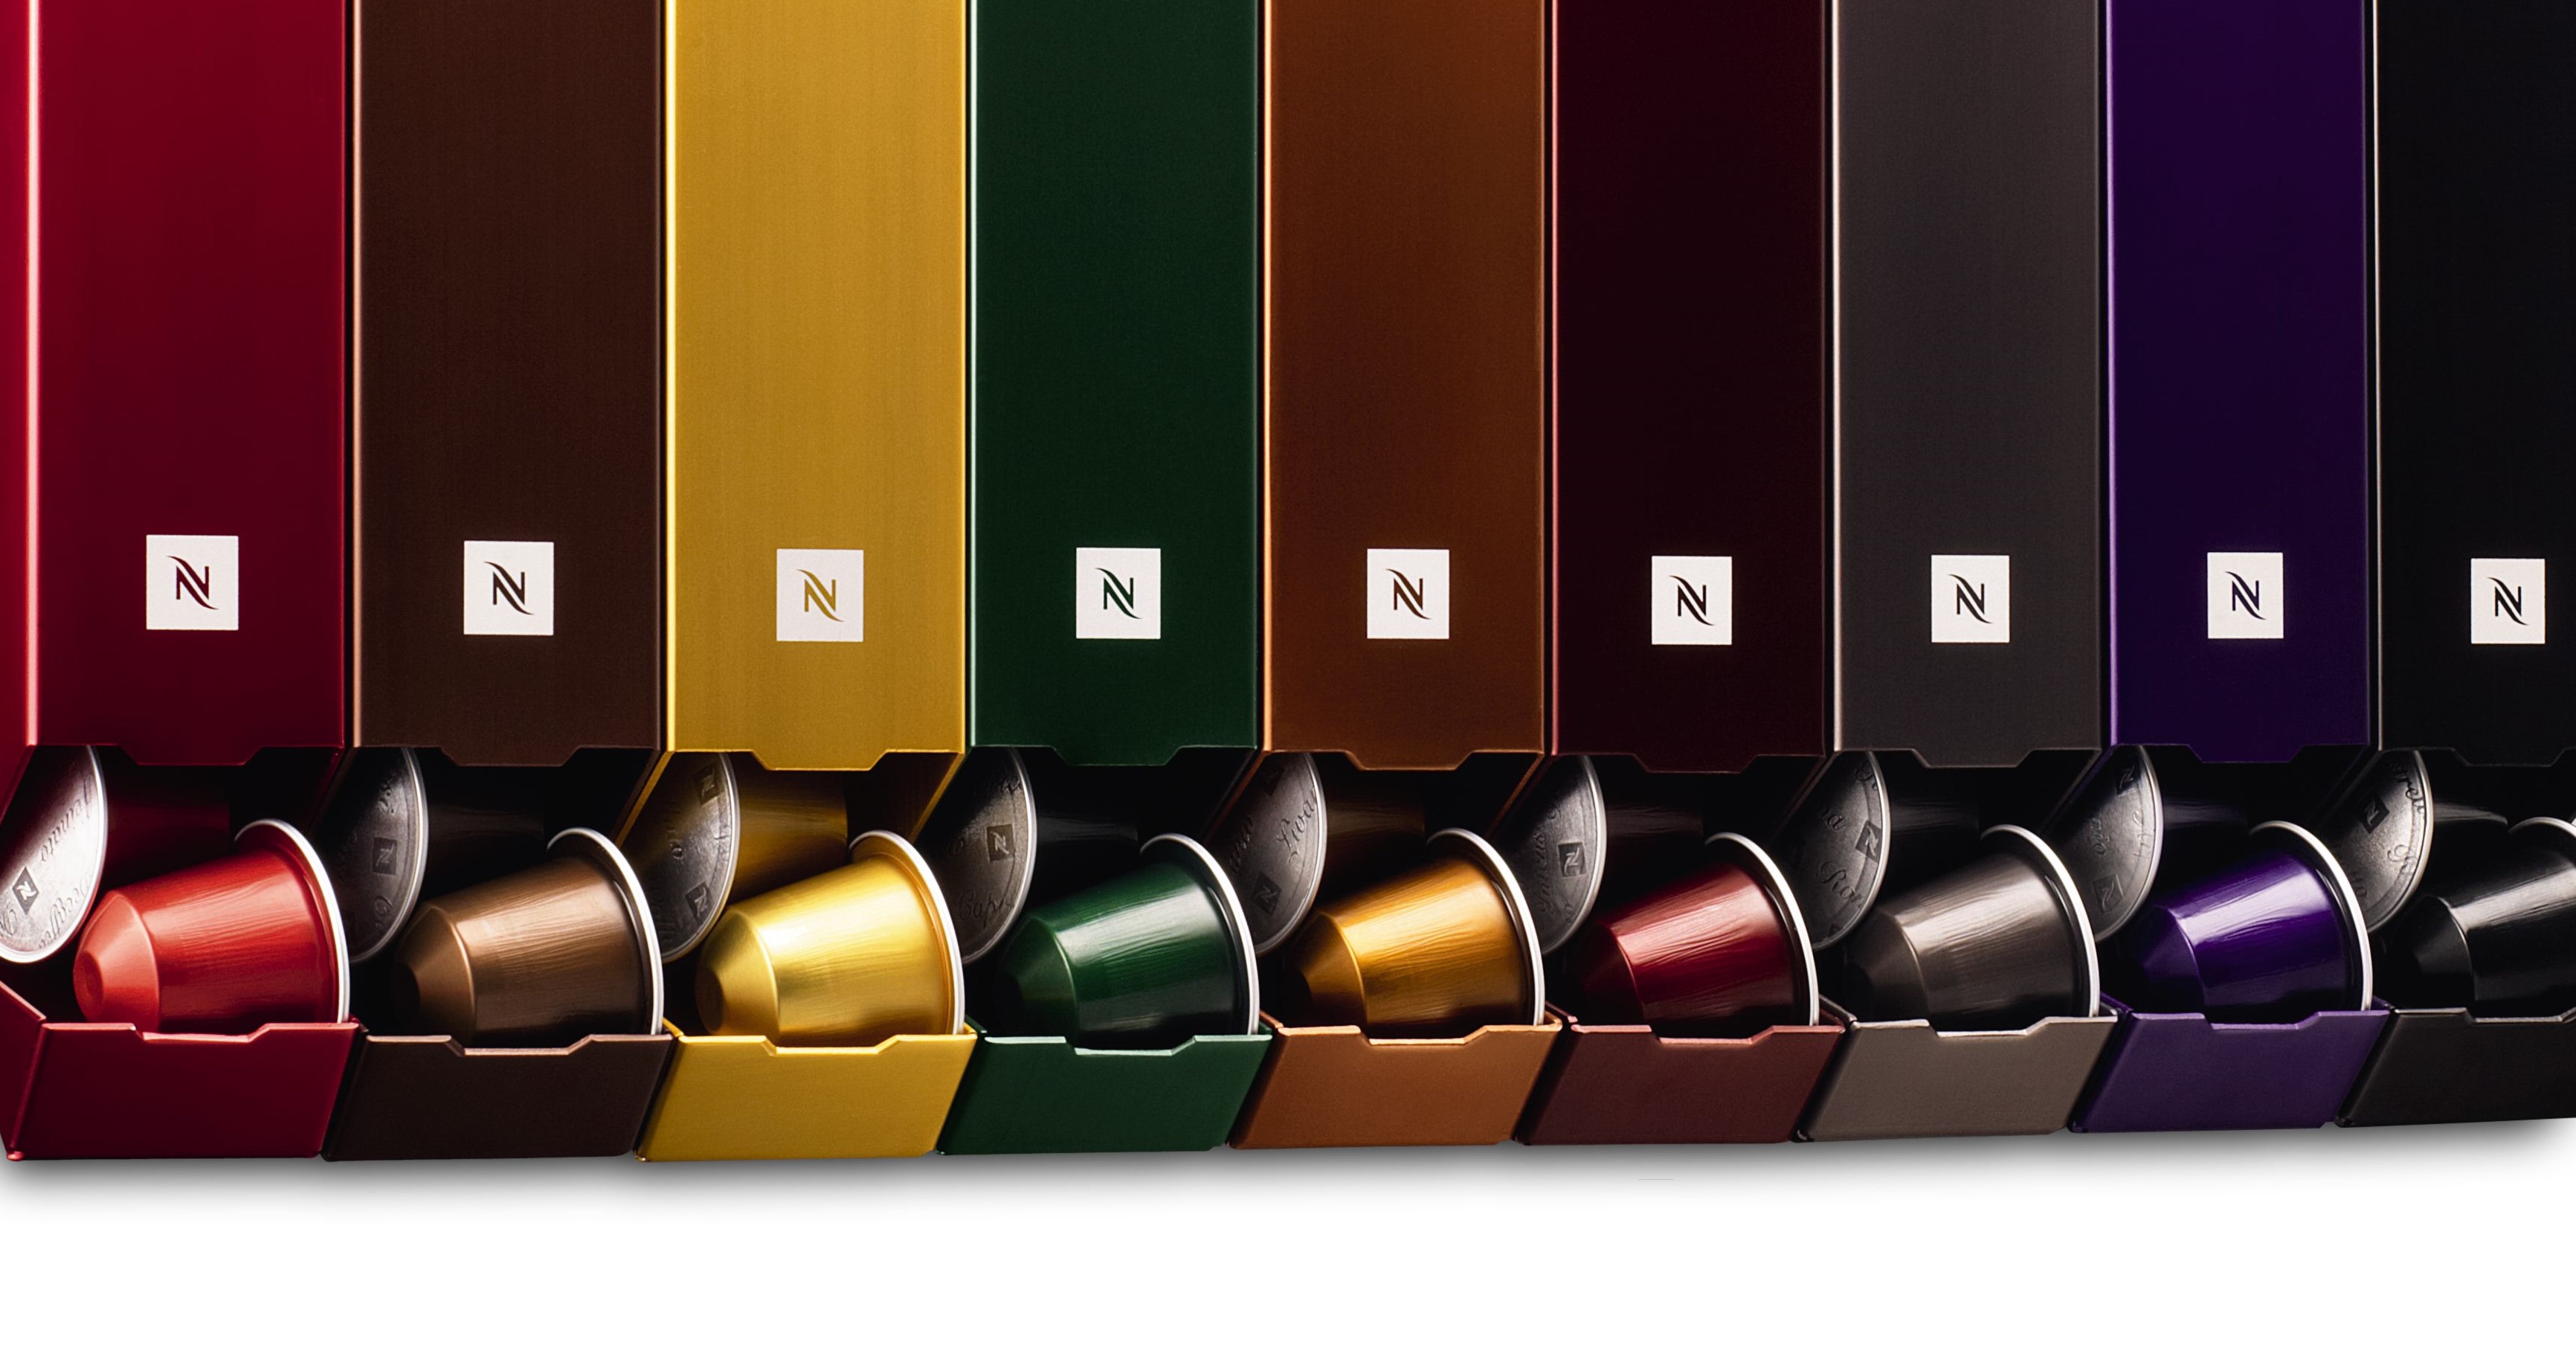 Robot boutiques, caramelizio and cafes: How Nestlé believes Nespresso  innovation will keep it at the top